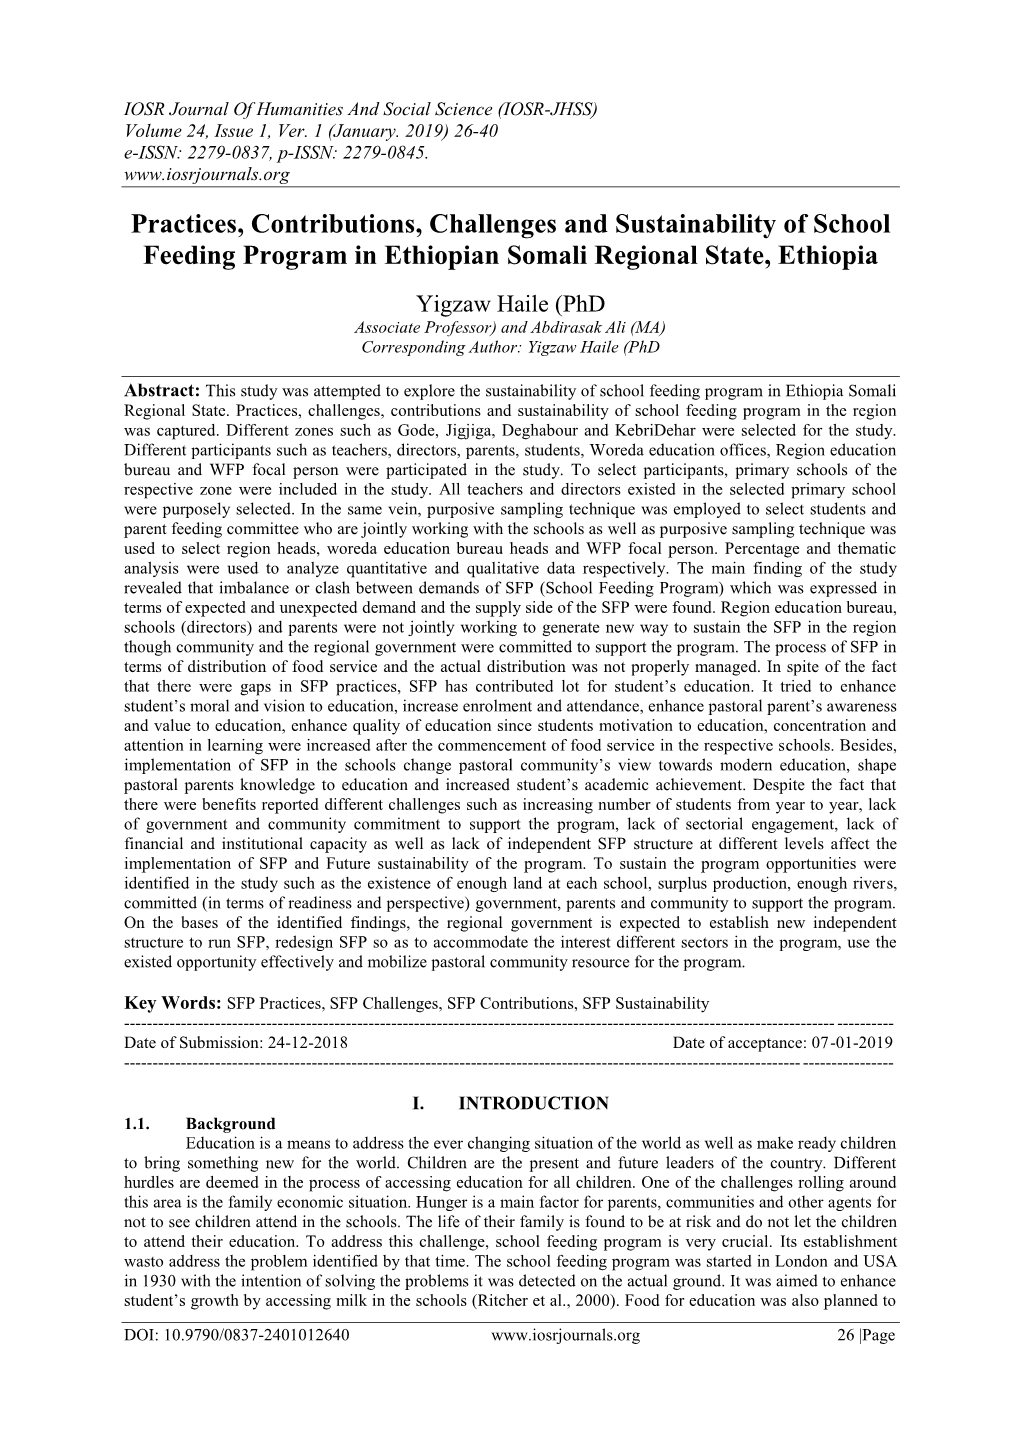 Practices, Contributions, Challenges and Sustainability of School Feeding Program in Ethiopian Somali Regional State, Ethiopia